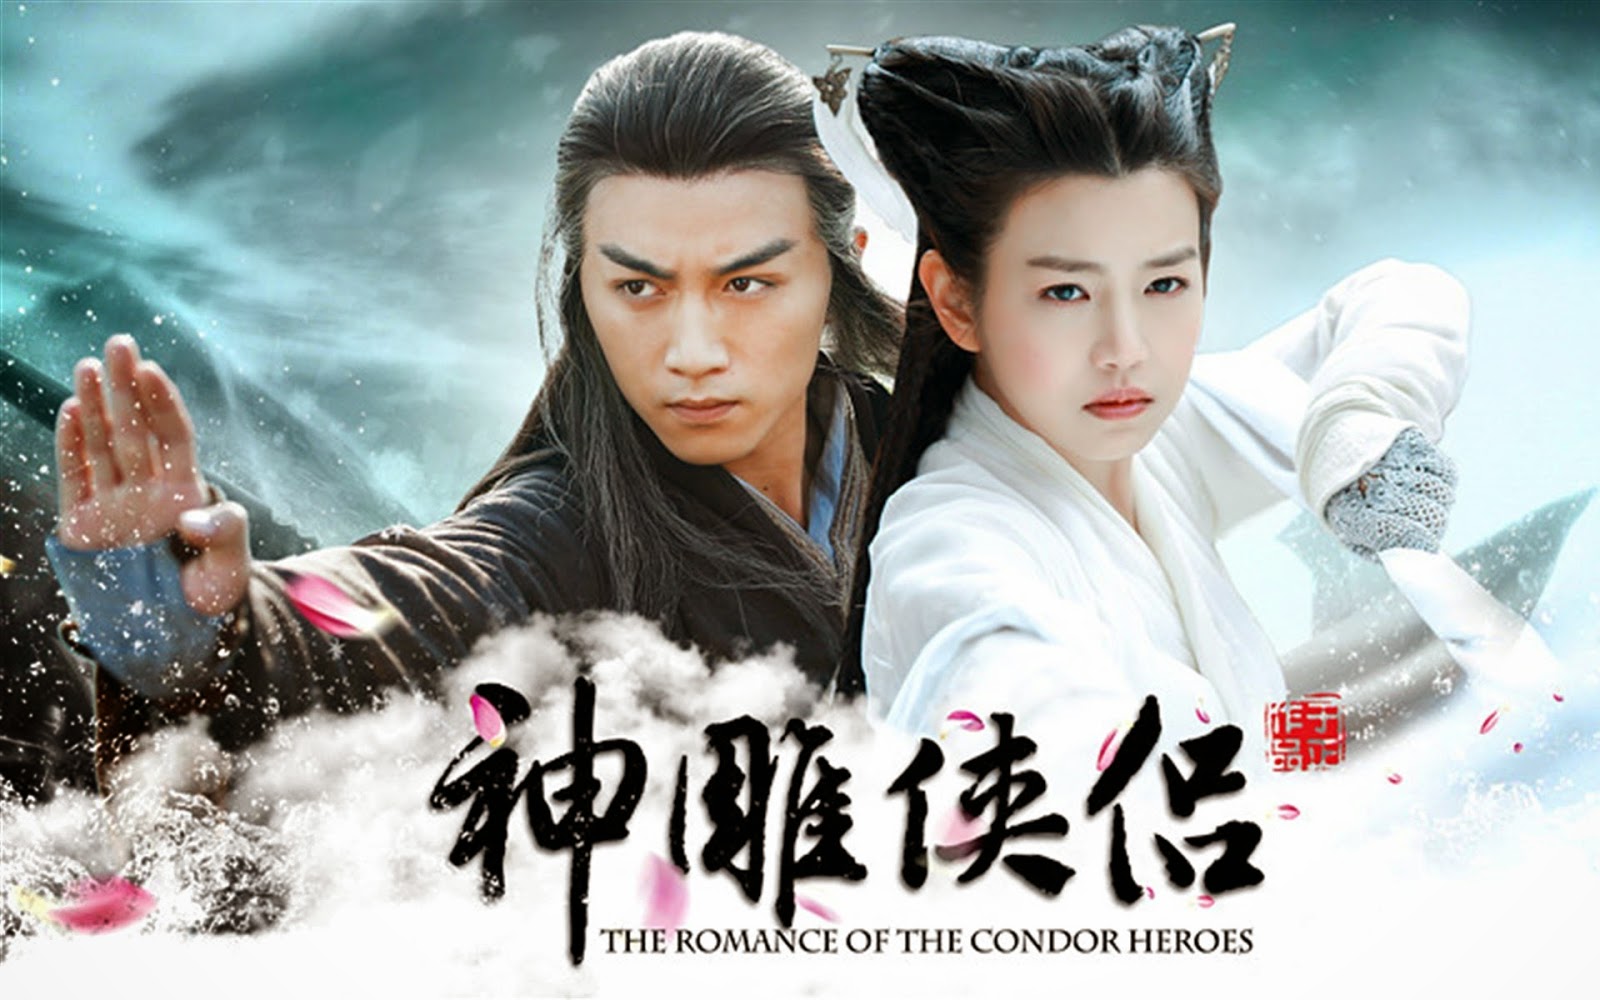 Chinese TV series become hit in S. Korea